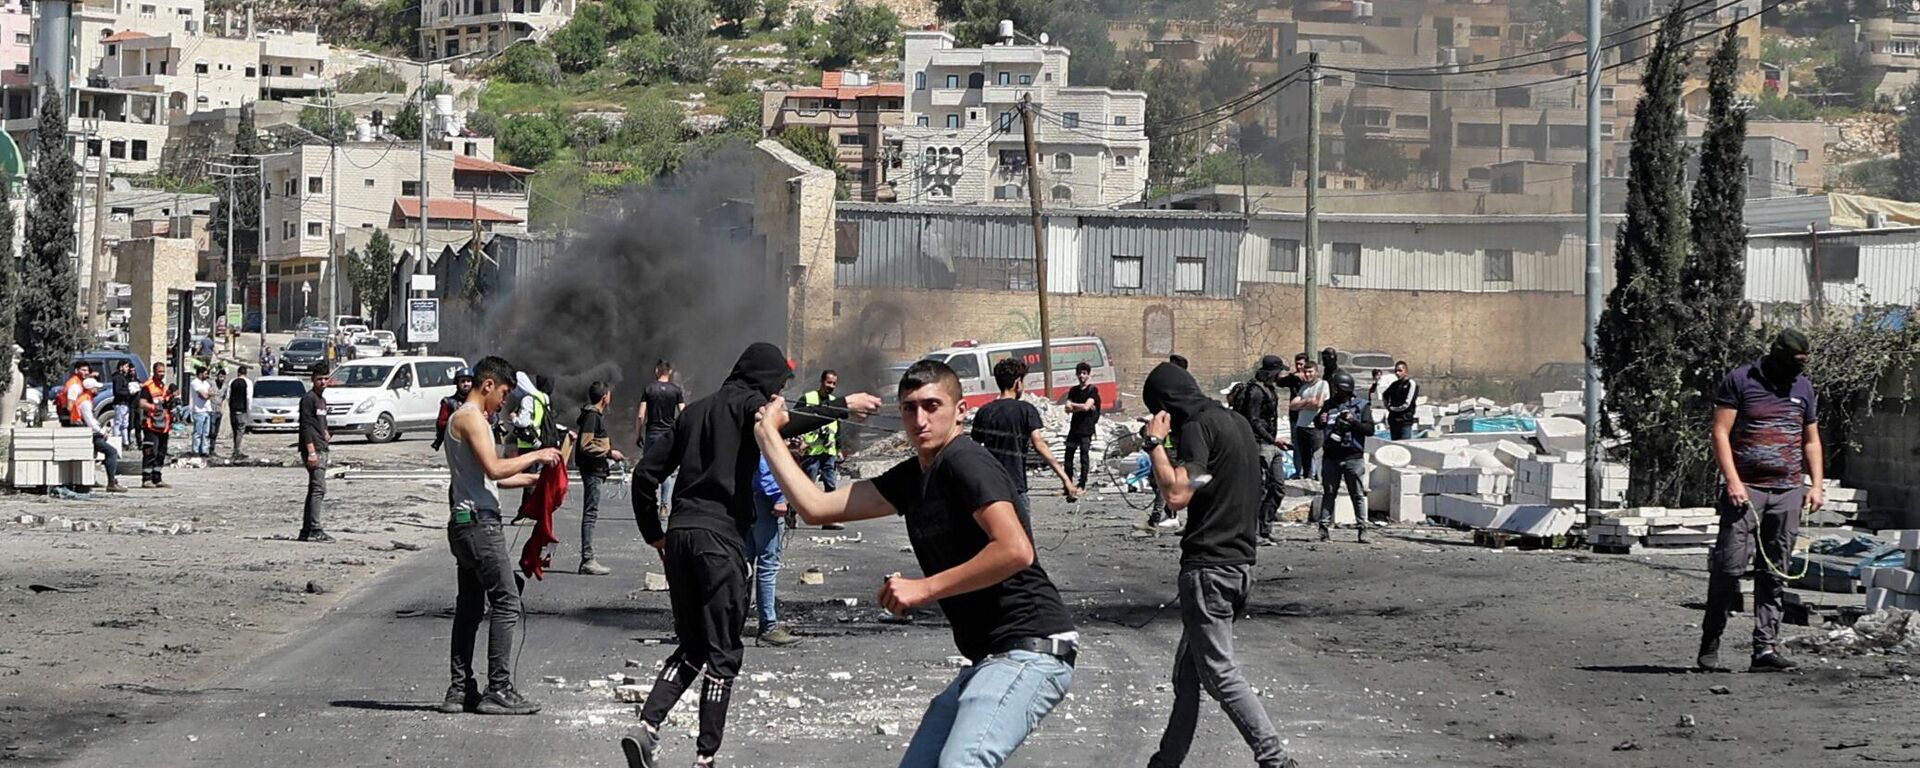 Palestinian protesters hurl rocks at Israeli security amid clashes during a demonstration against Jewish settlements and in support of Jerusalem's Al-Aqsa mosque, on the main street of Beita village in the occupied West Bank, on April 15, 2022. - Sputnik International, 1920, 16.04.2022